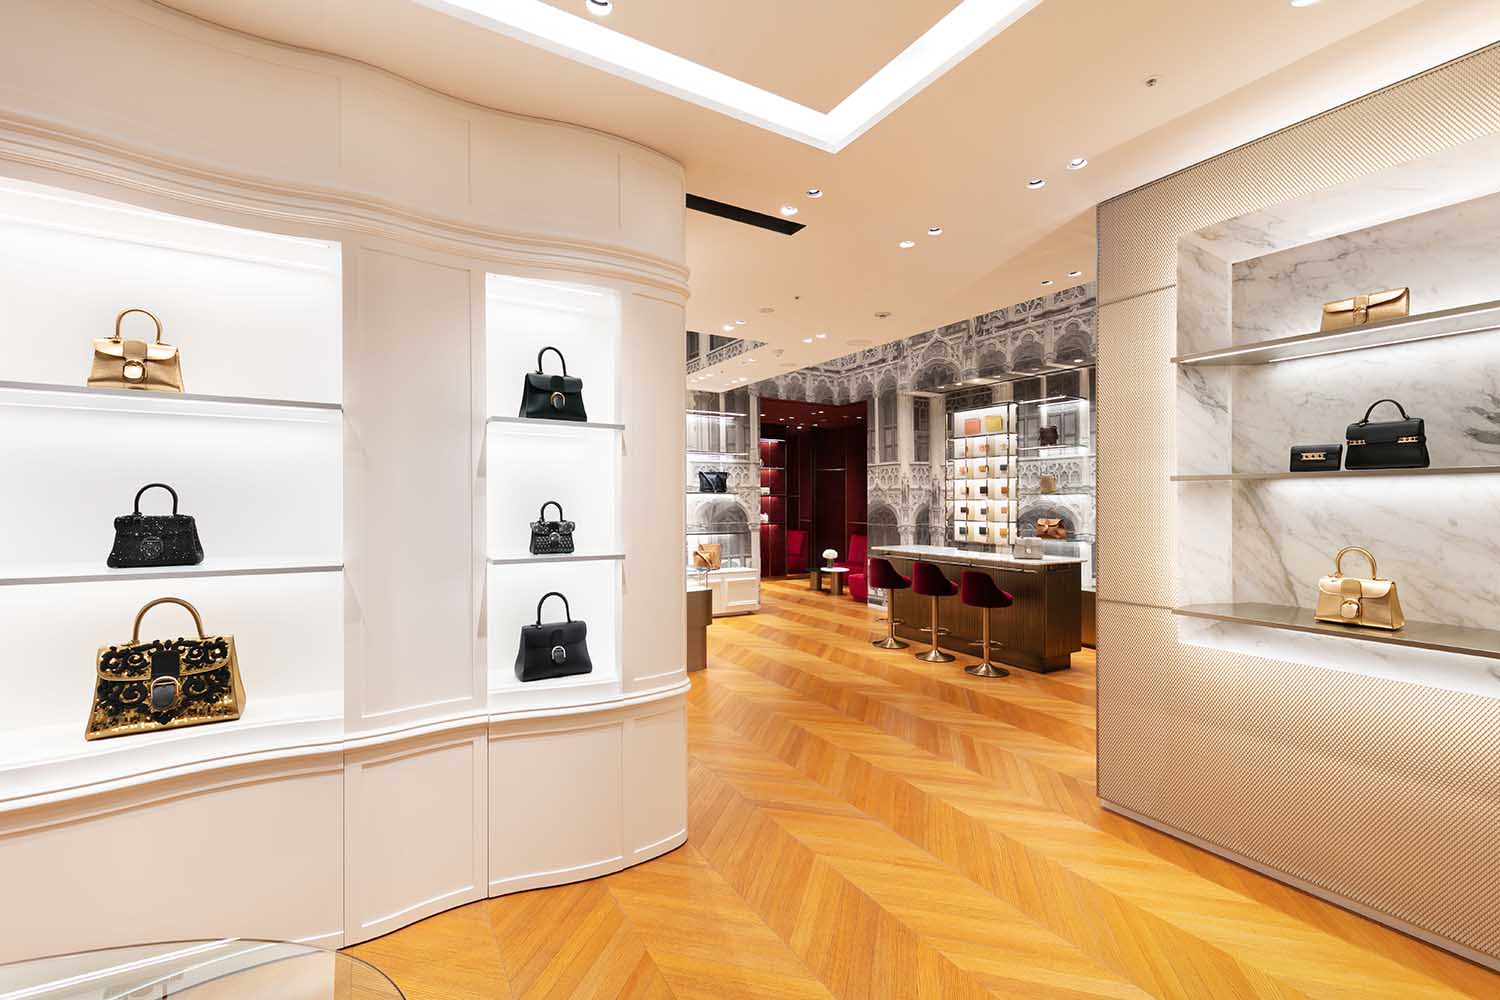 Fourth flagship store of Delvaux in the French capital - Harmonies Magazine